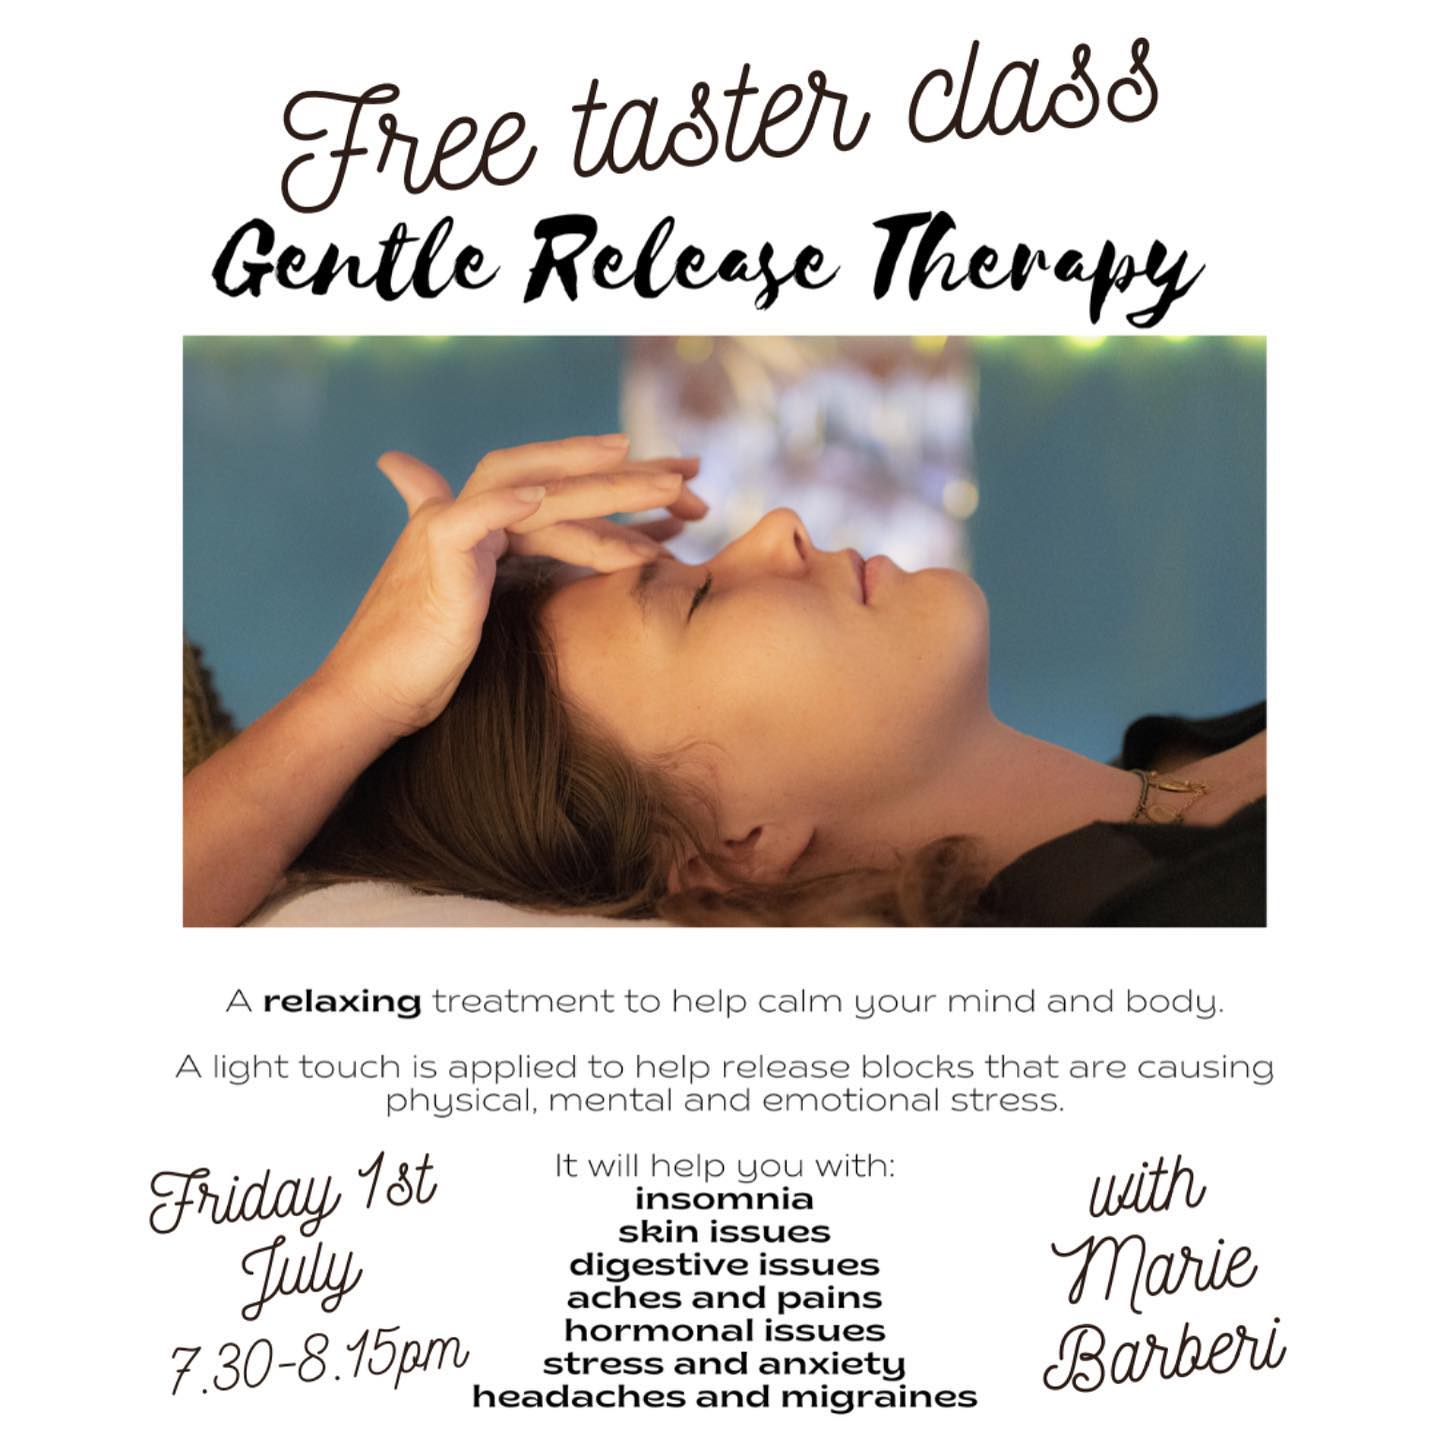 We’re offering a free taster class to sample this lovely relaxing treatment from our local therapist Marie Barberi. 

Gentle Release Therapy is a gentle treatment using a light touch or intention, to an area of the body that is holding onto blocks. These could be physical, emotional, mental or spiritual. There are 6 systems to help support your body. The abdomen and chest, the cranial system, the spinal system, the endocrine system, the lymphatic system and the emotional body. Gentle Release Therapy brings the body back into balance creating harmony in your mind, body and soul.

Peaceful meditation music will be played during this meditative healing space. You will use a gentle calming breath to encourage the flow of oxygen to your body and to calm the nervous system. Visualisations may be used to help release any physical holds your body is holding on to. It is an intuitive practise, the healing will support your organs in your abdomen and chest.

Book via our timetable page on our website! 🥰☯️